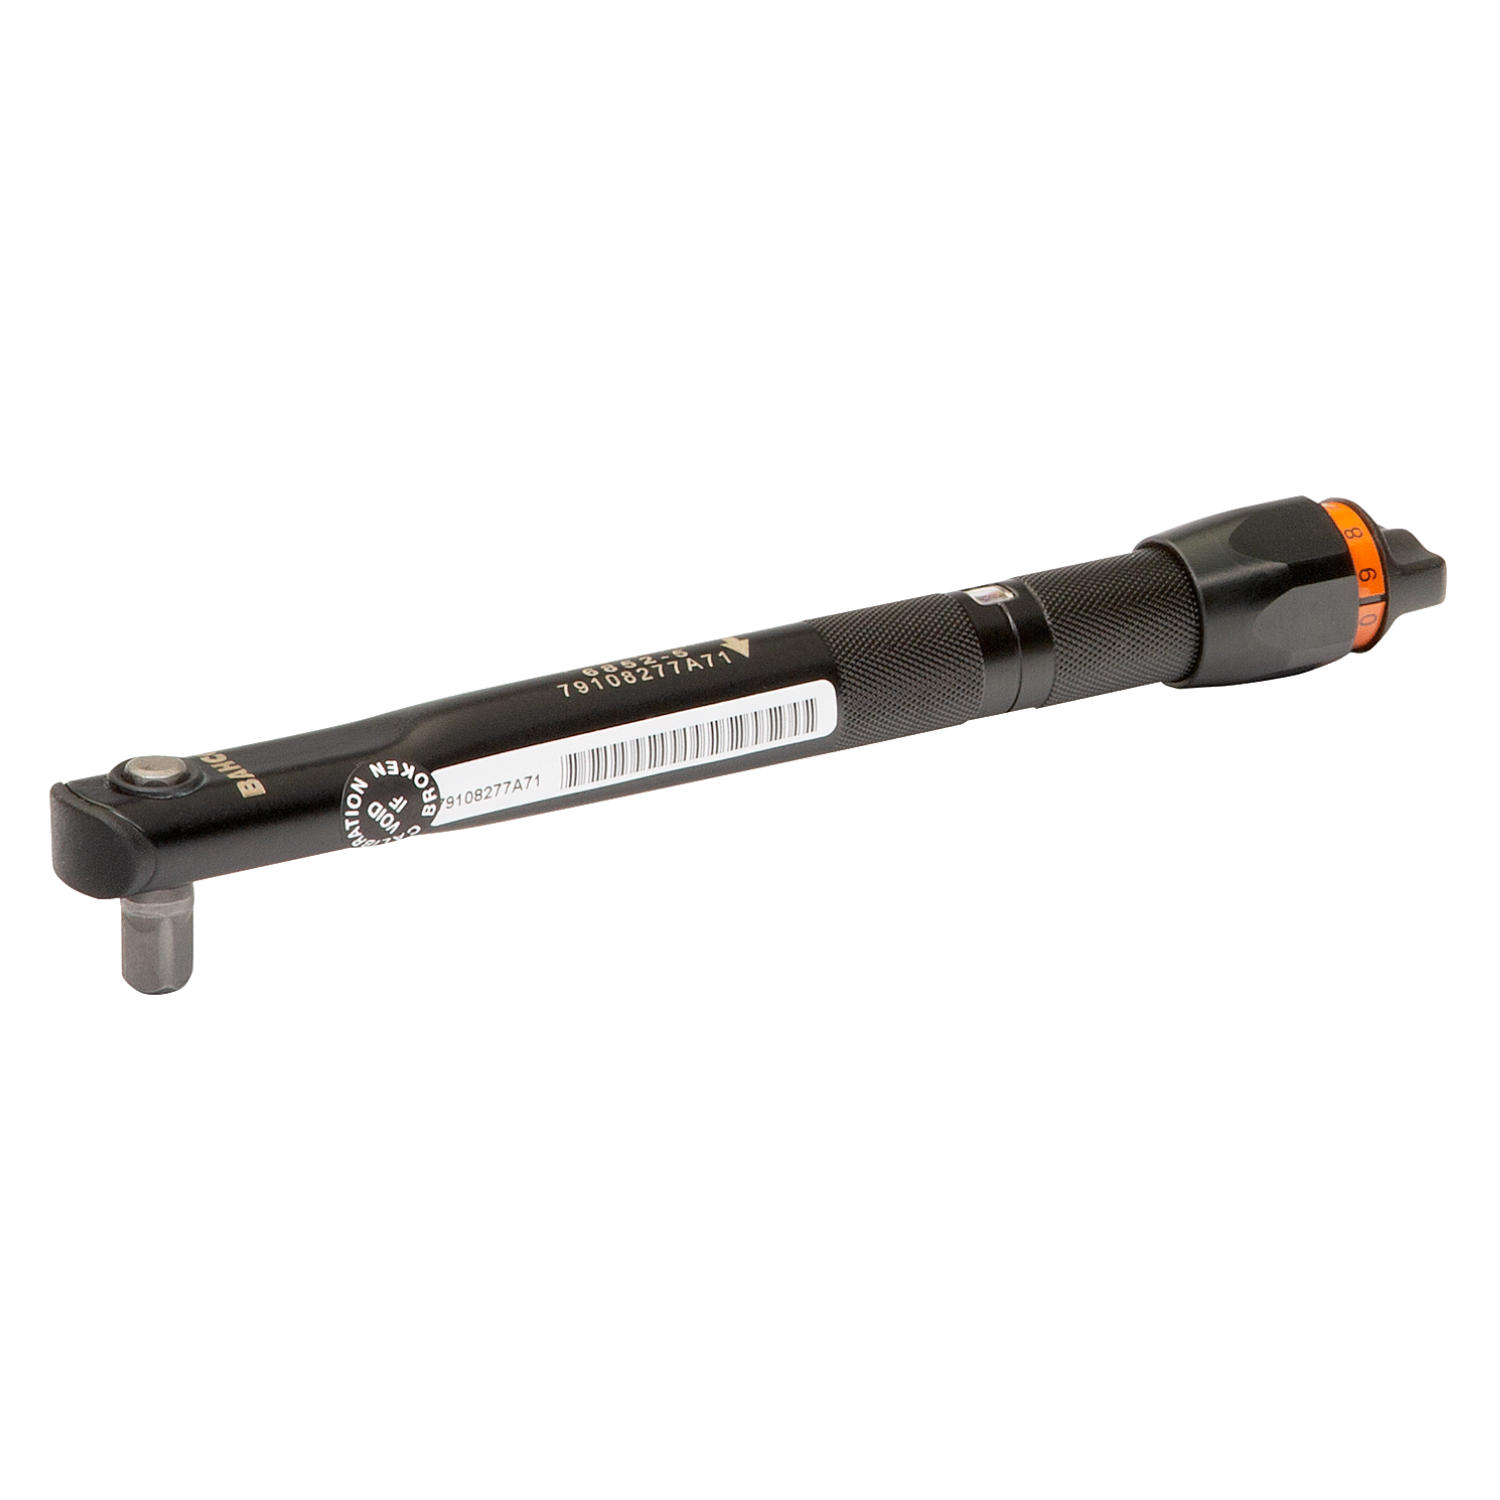 BAHCO 6852-5 Adjustable Torque Mini Wrench with Screwdriver Bit - Premium Adjustable Torque from BAHCO - Shop now at Yew Aik.